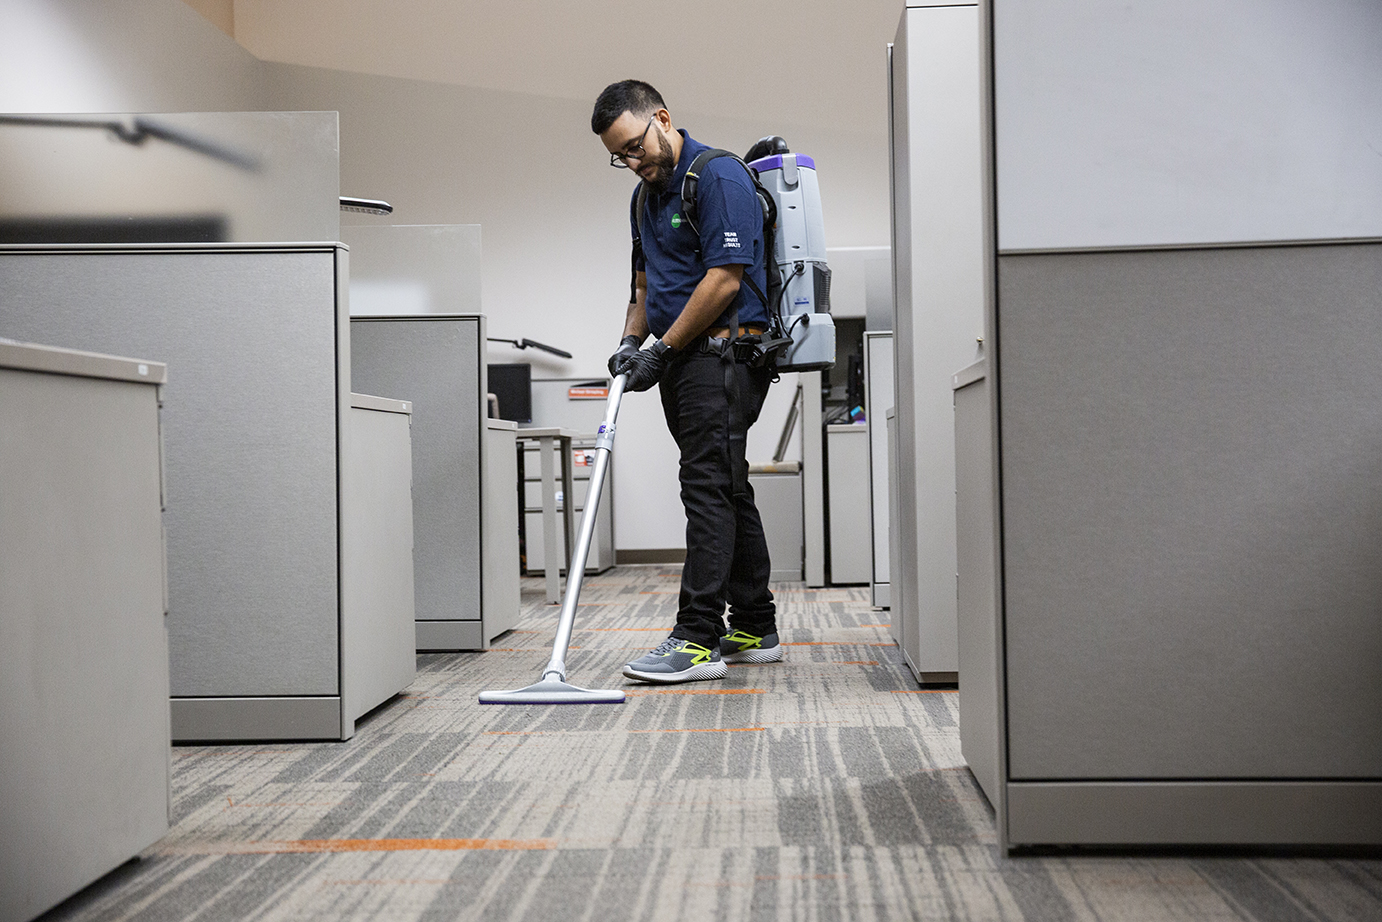 Look for janitorial service companies in Milwaukee, WI that meet your unique needs.